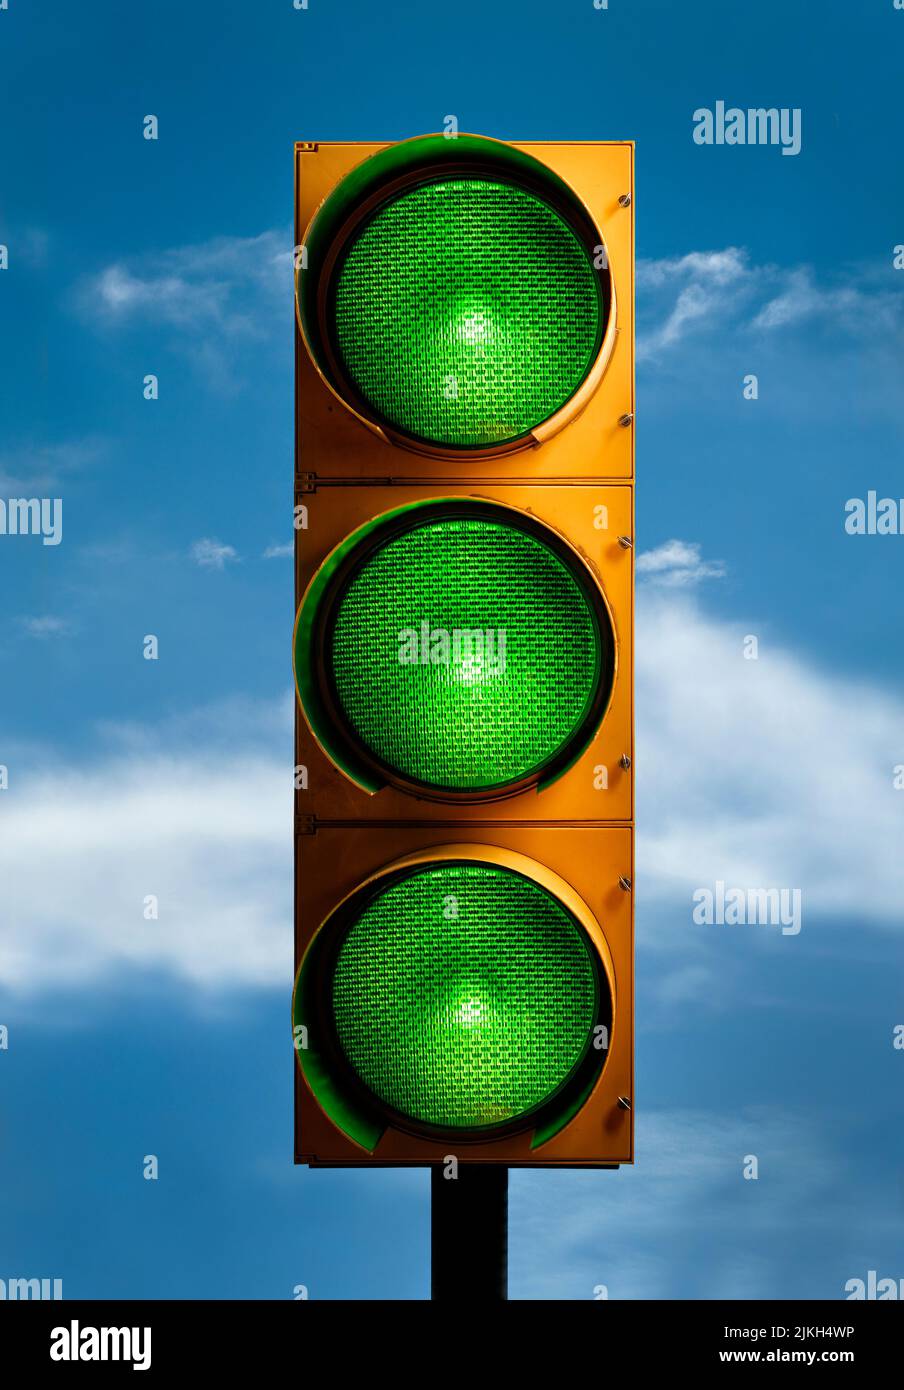 A vertical closeup shot of a traffic light with all green lights against the blue sky Stock Photo